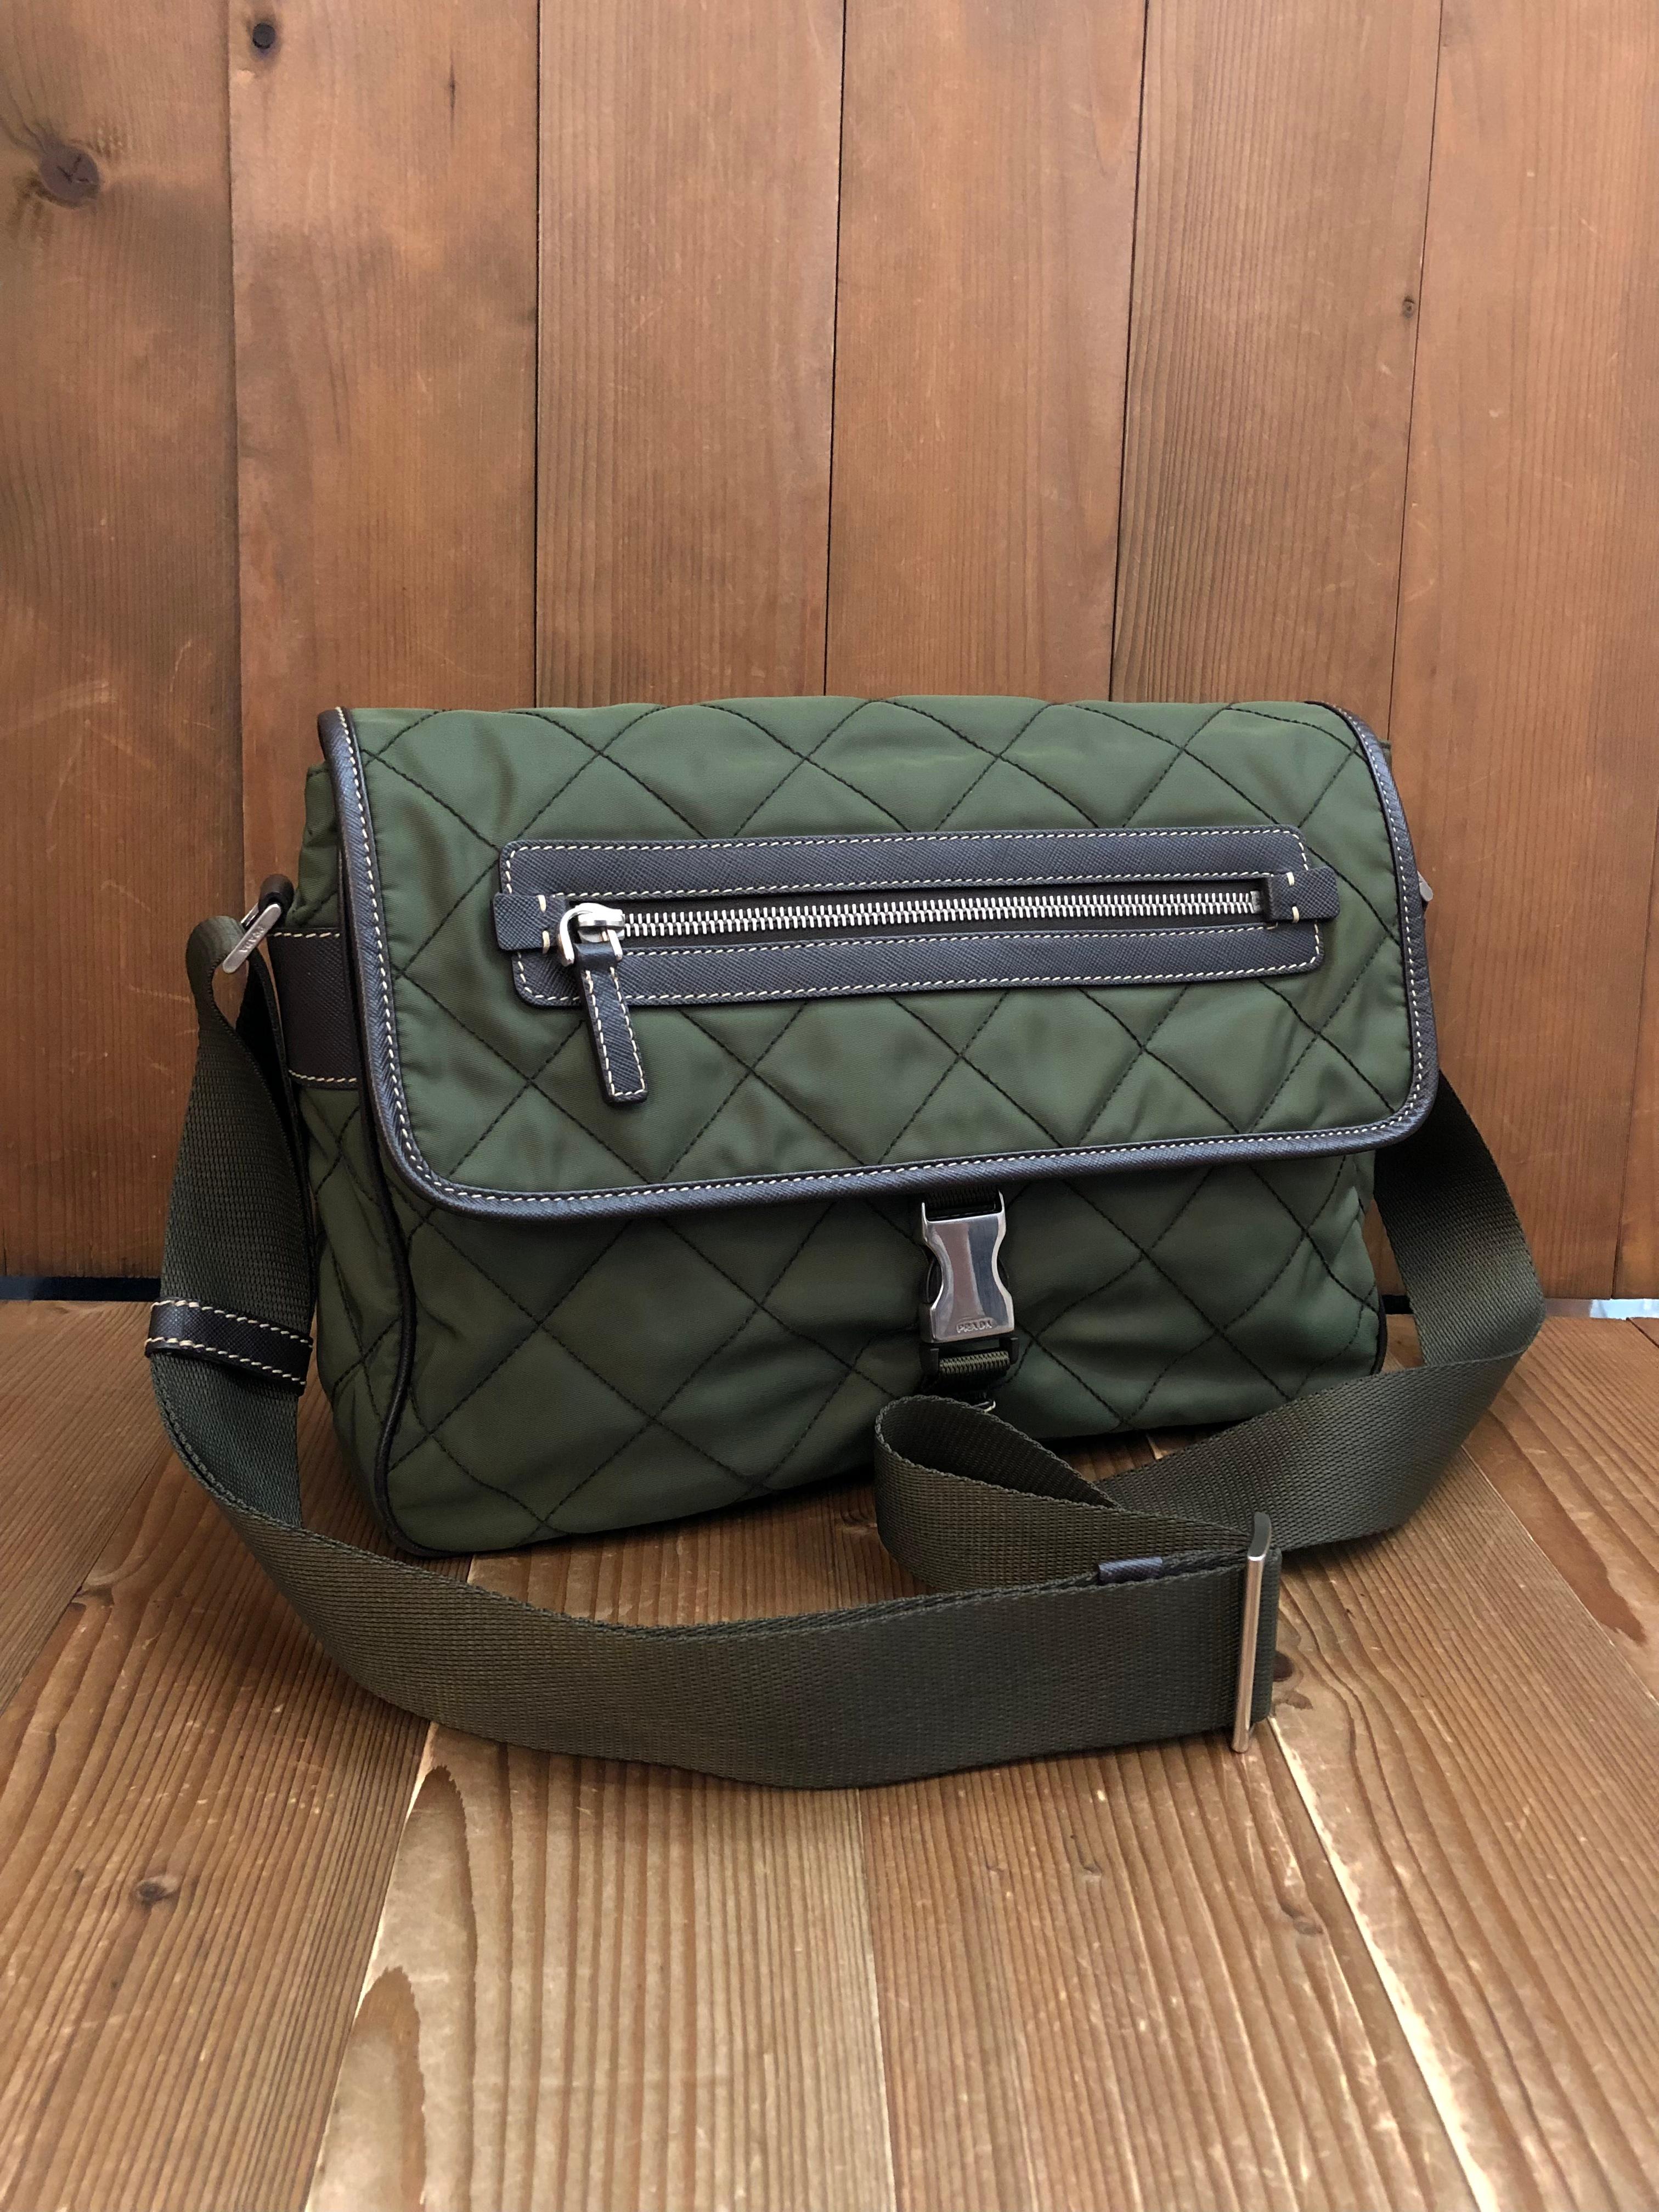 This stylish PRADA messenger crossbody bag is crafted of diamond quilted Tessuto polyester in army green featuring stainless steel hardware and Saffiano leather trims. Front flap buckle closure opens to an army green jacquard interior featuring a